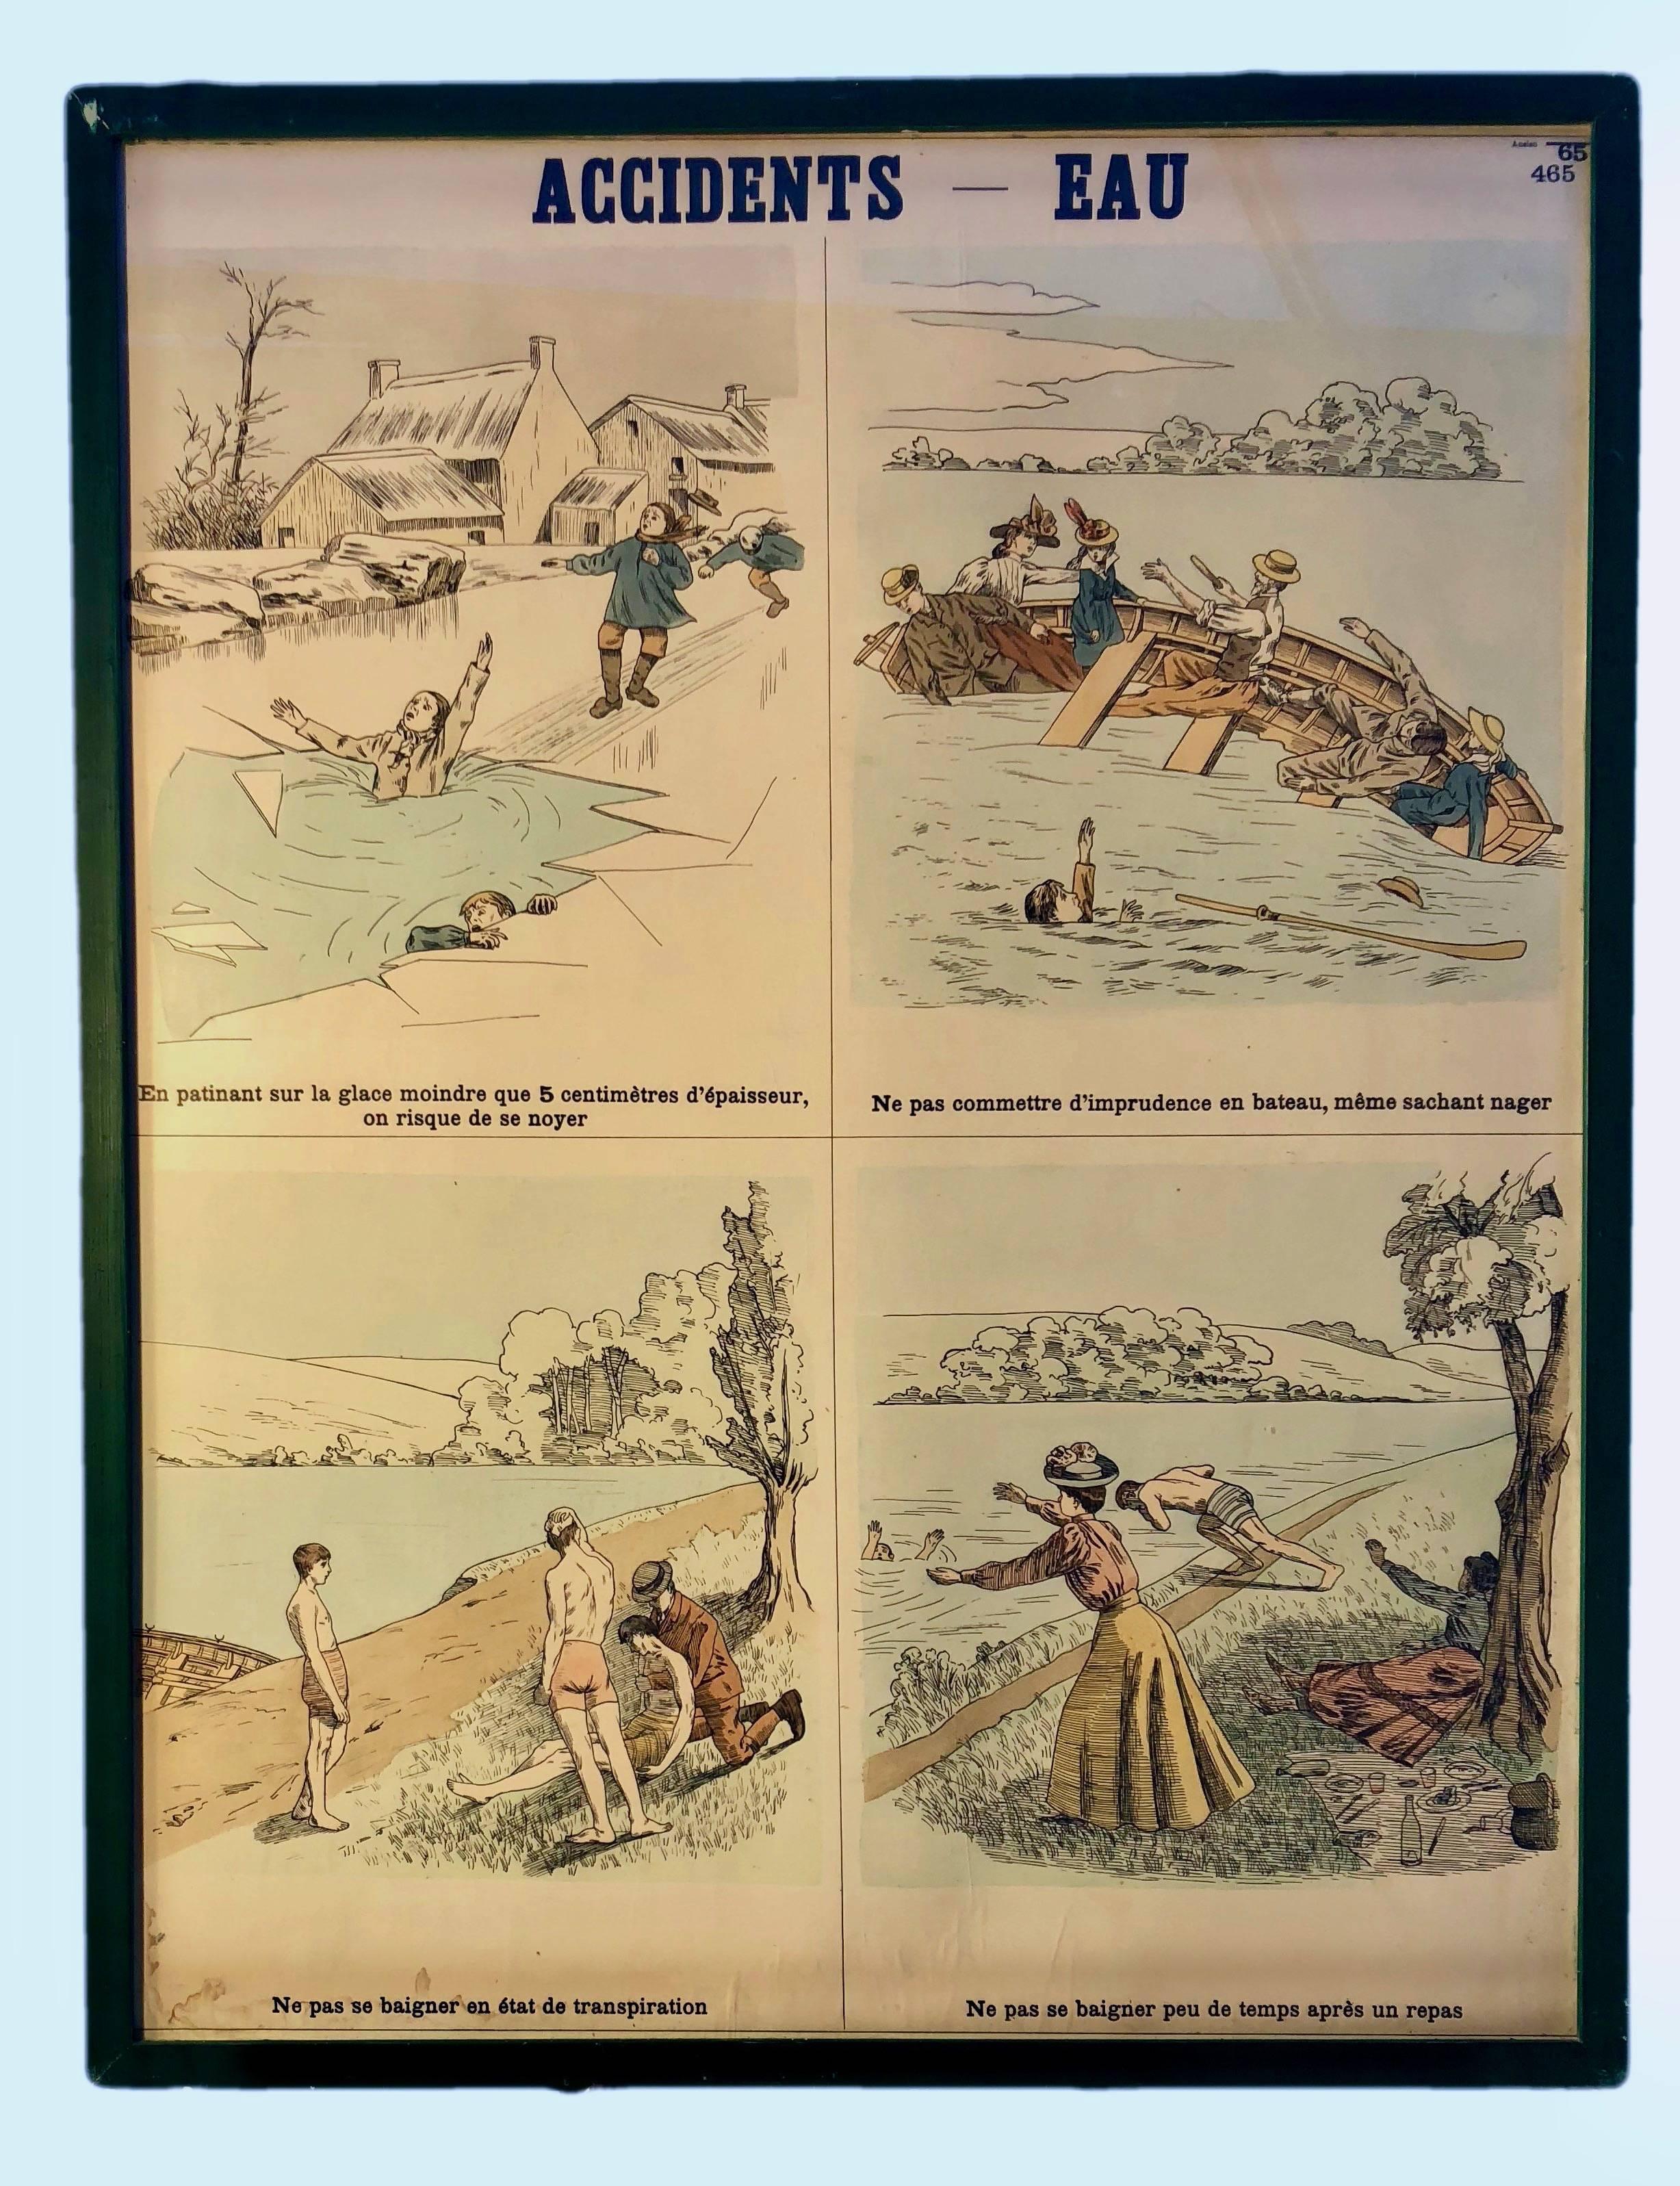 This is a rare set of eight French colorful lithographs used by schools in the 1950s to teach accident prevention to children. Each hazard is written in French and includes- water, poison, (four) fire, home hazards, epidemics and asphyxia. They are